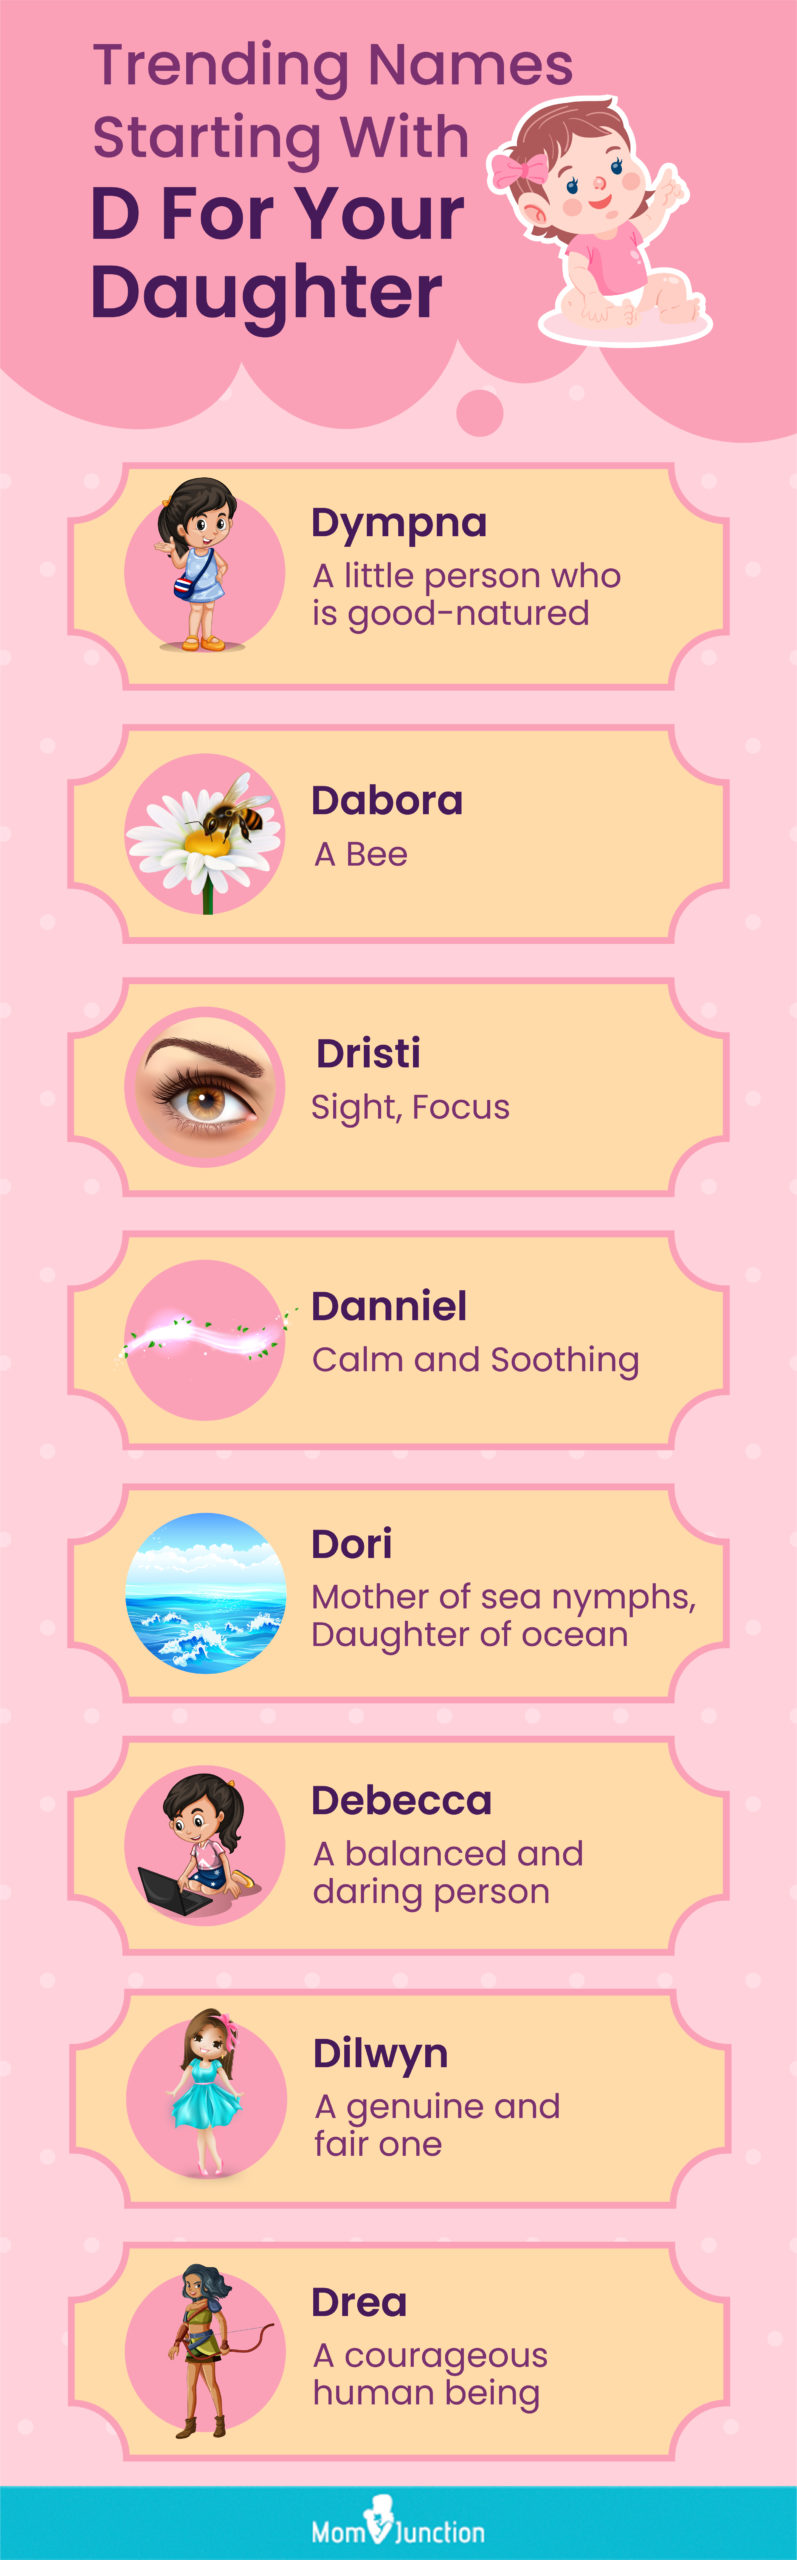 trending names starting with d for your daughter (infographic)